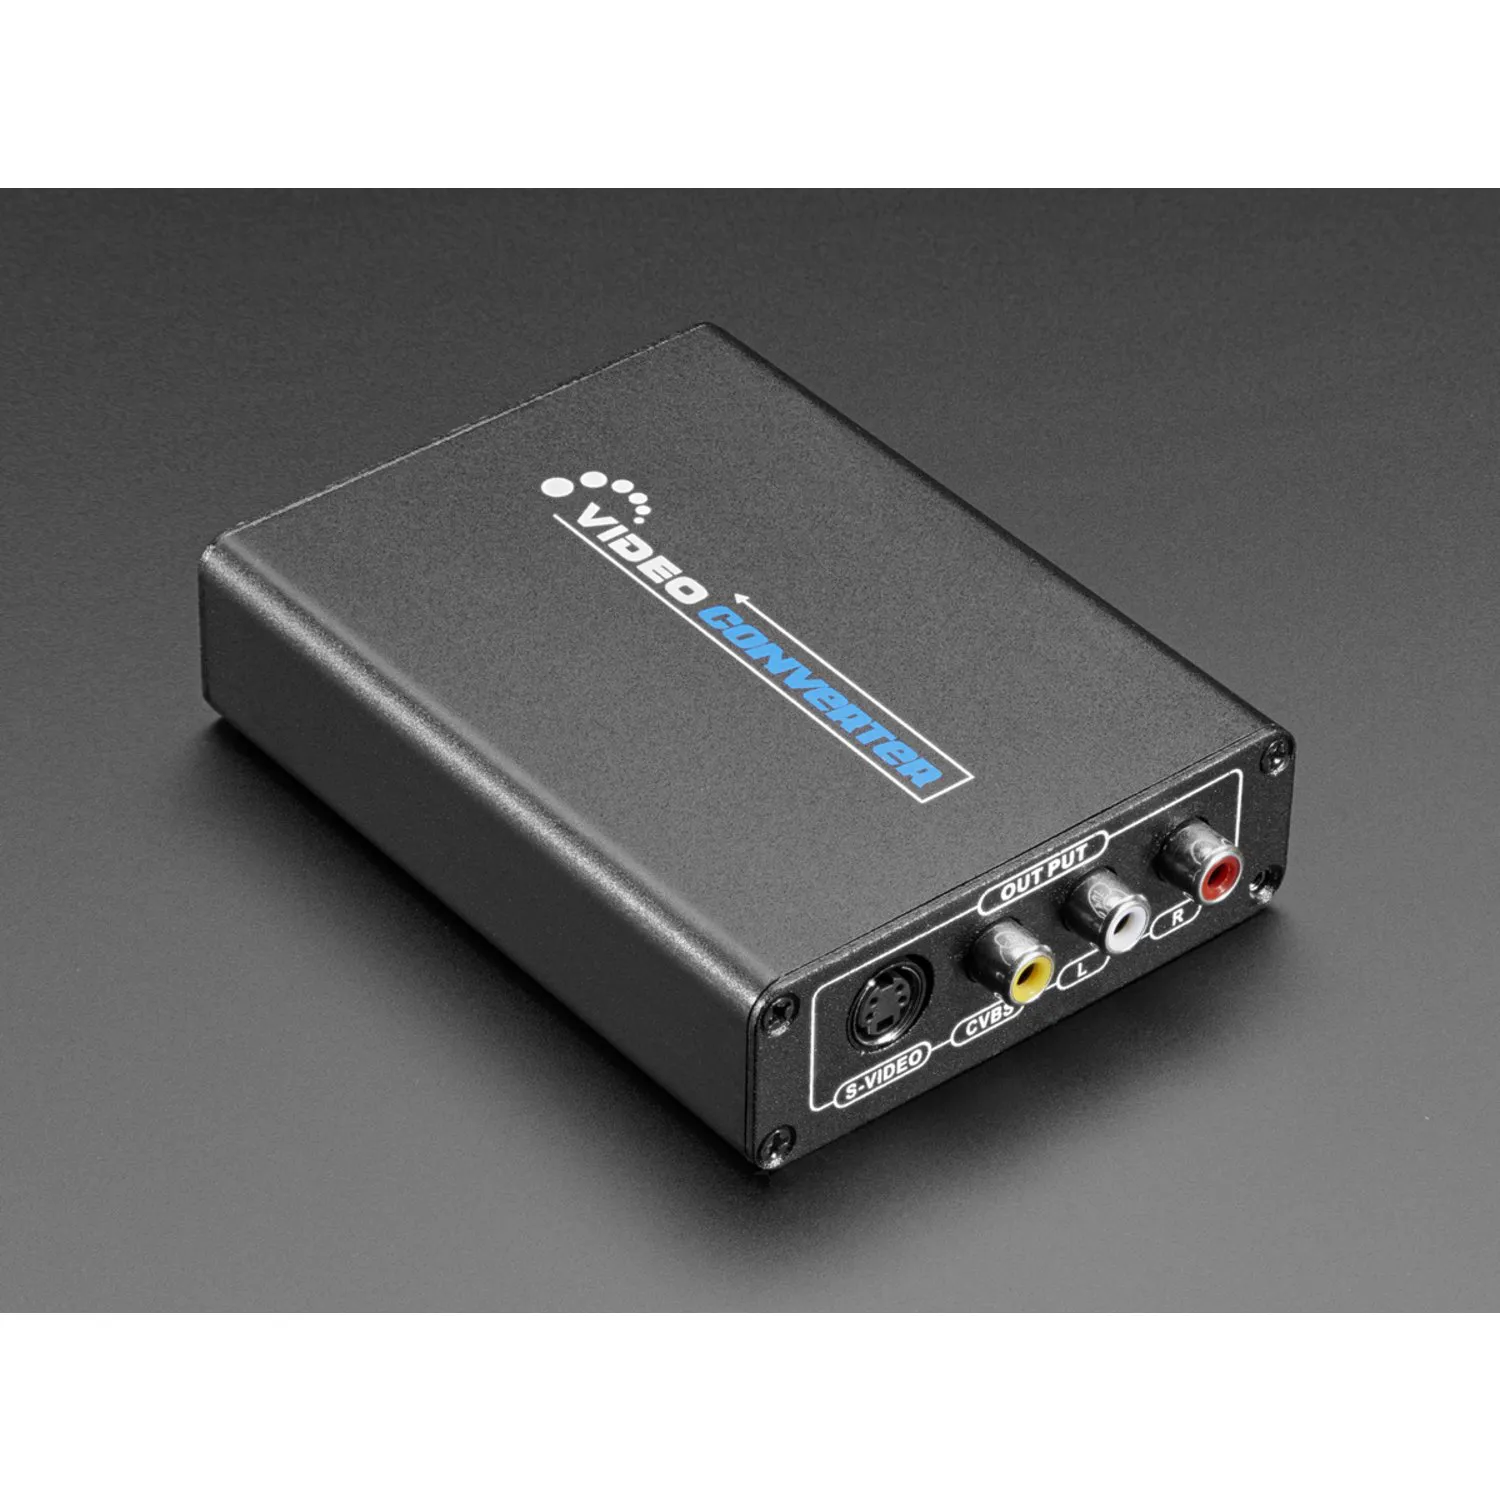 Photo of HDMI to RCA Audio and CVBS NTSC, PAL, or S-Video Converter